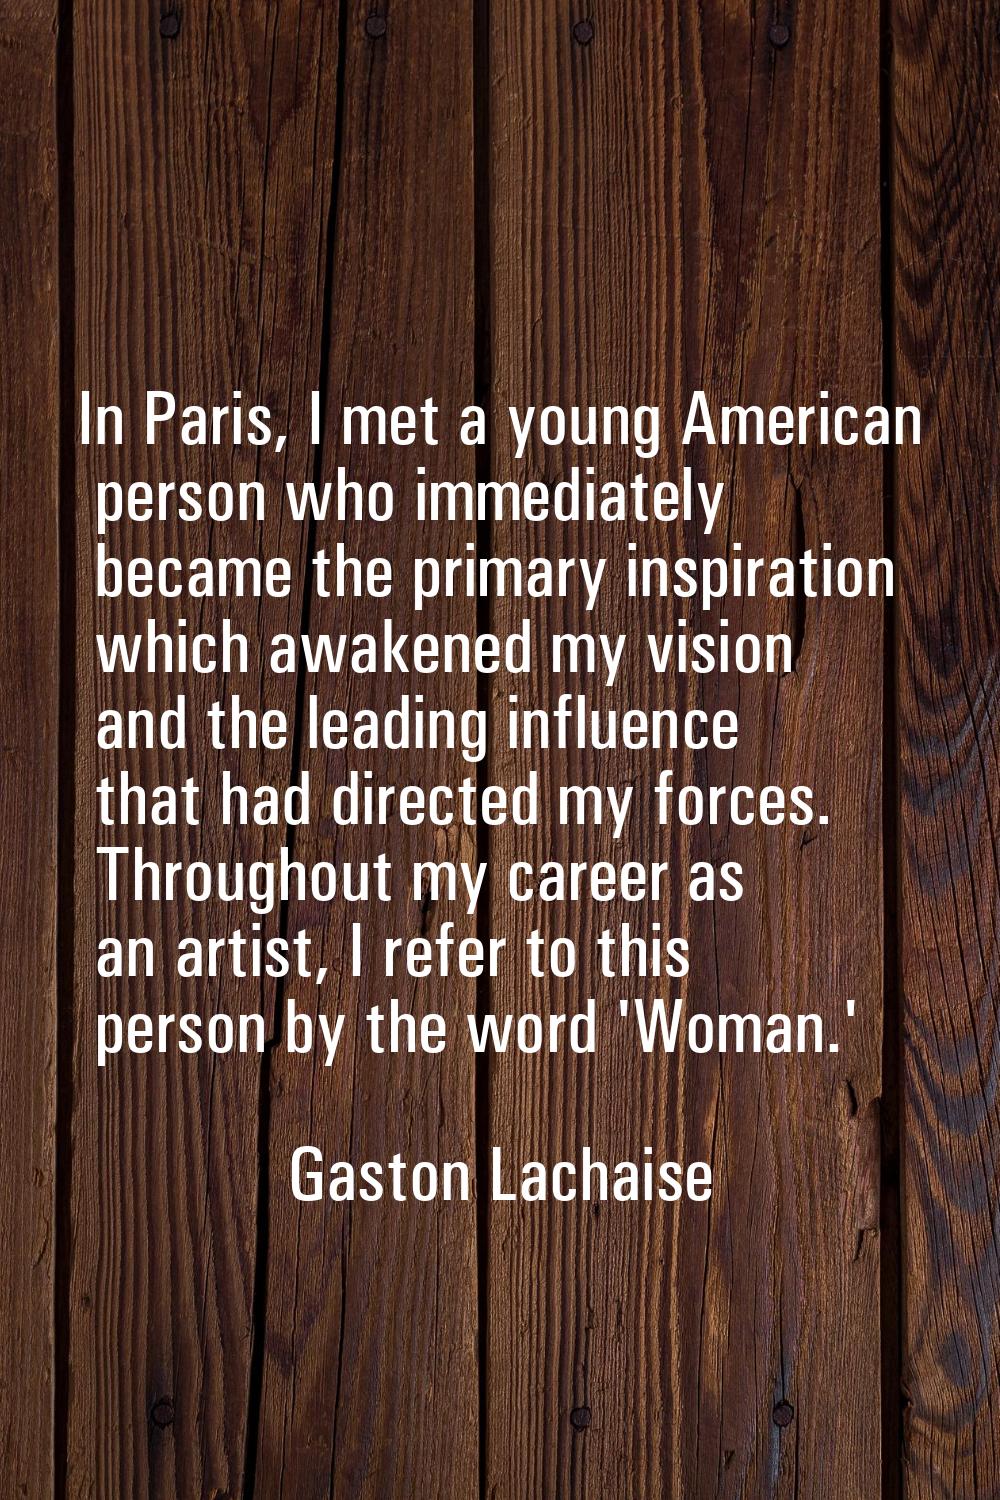 In Paris, I met a young American person who immediately became the primary inspiration which awaken